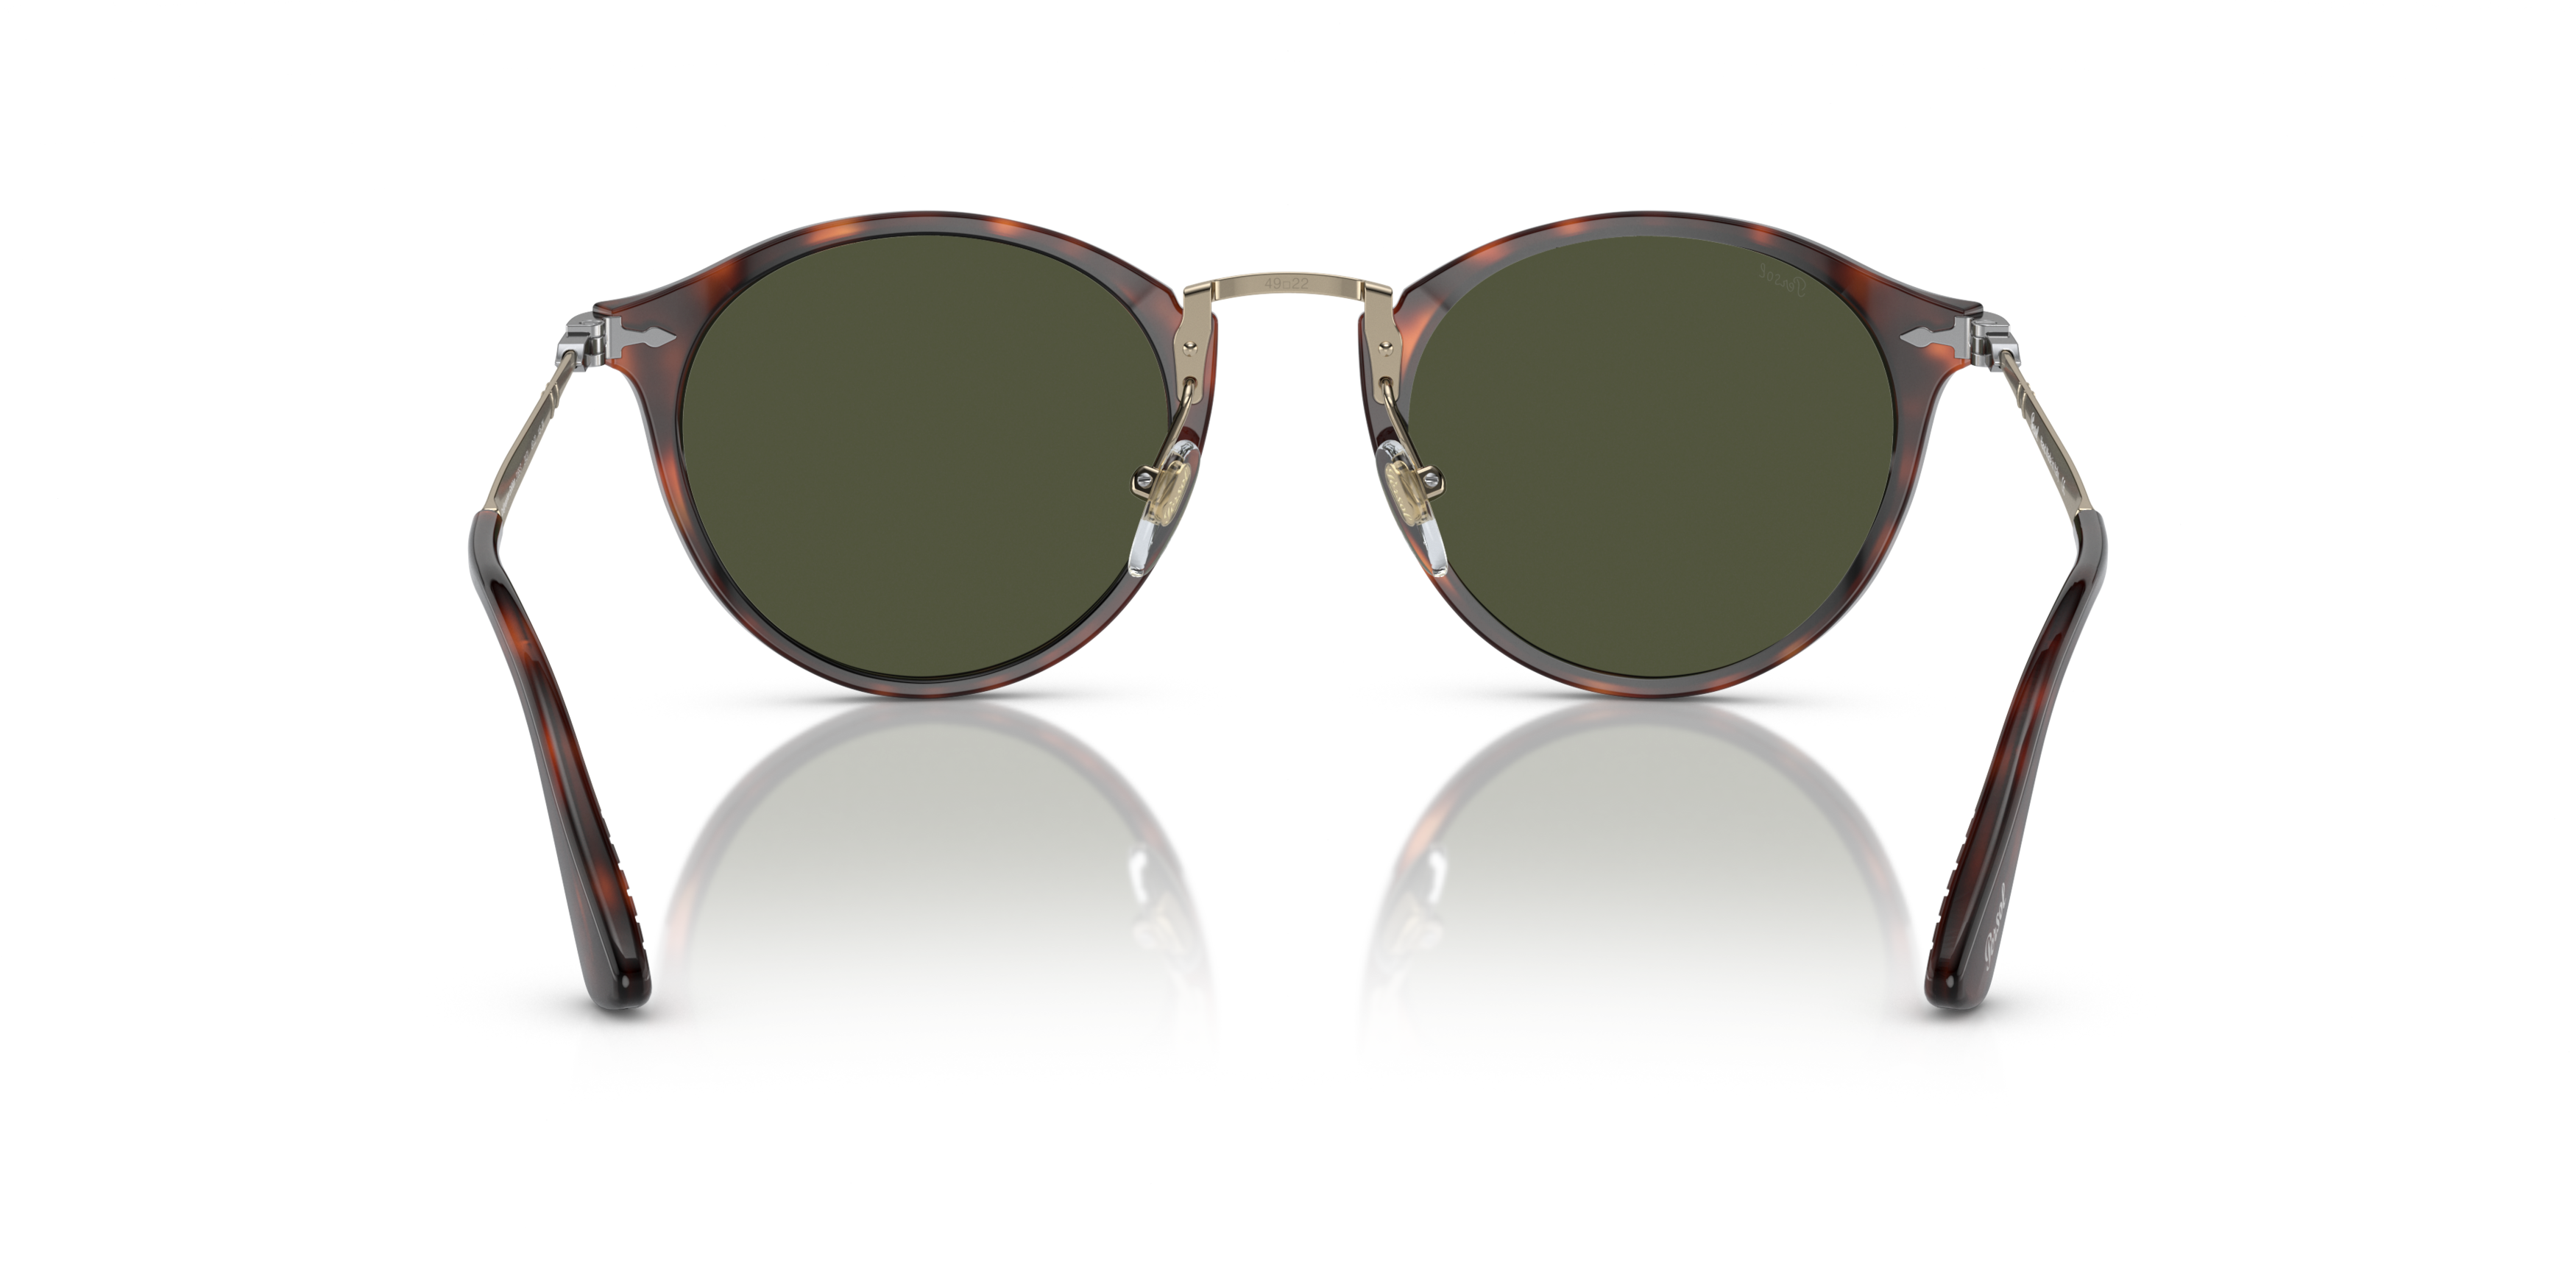 [products.image.detail02] Persol 0PO3166S 24/31